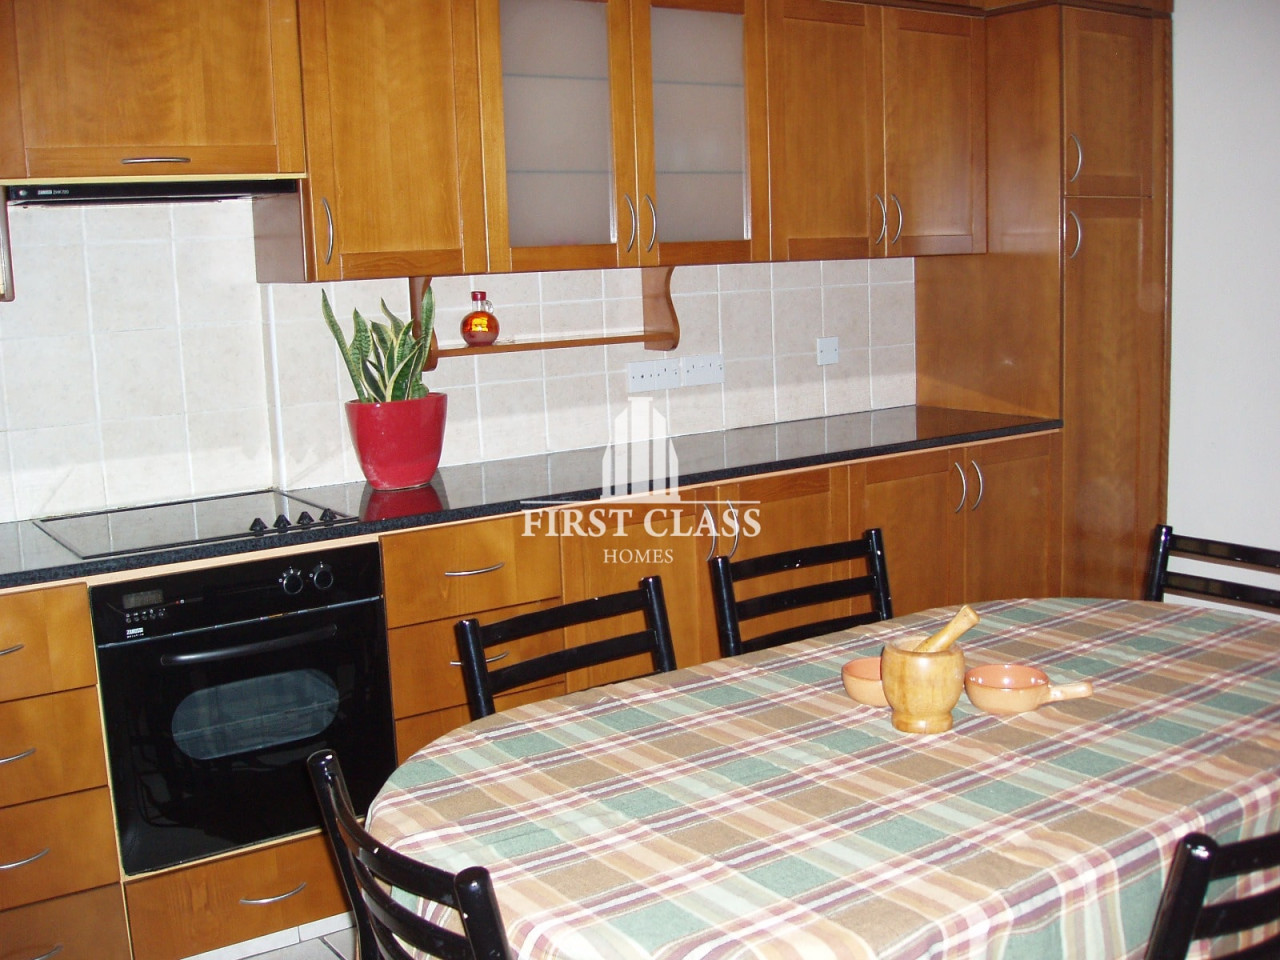 Property for Rent: Apartment (Flat) in Strovolos, Nicosia for Rent | Key Realtor Cyprus